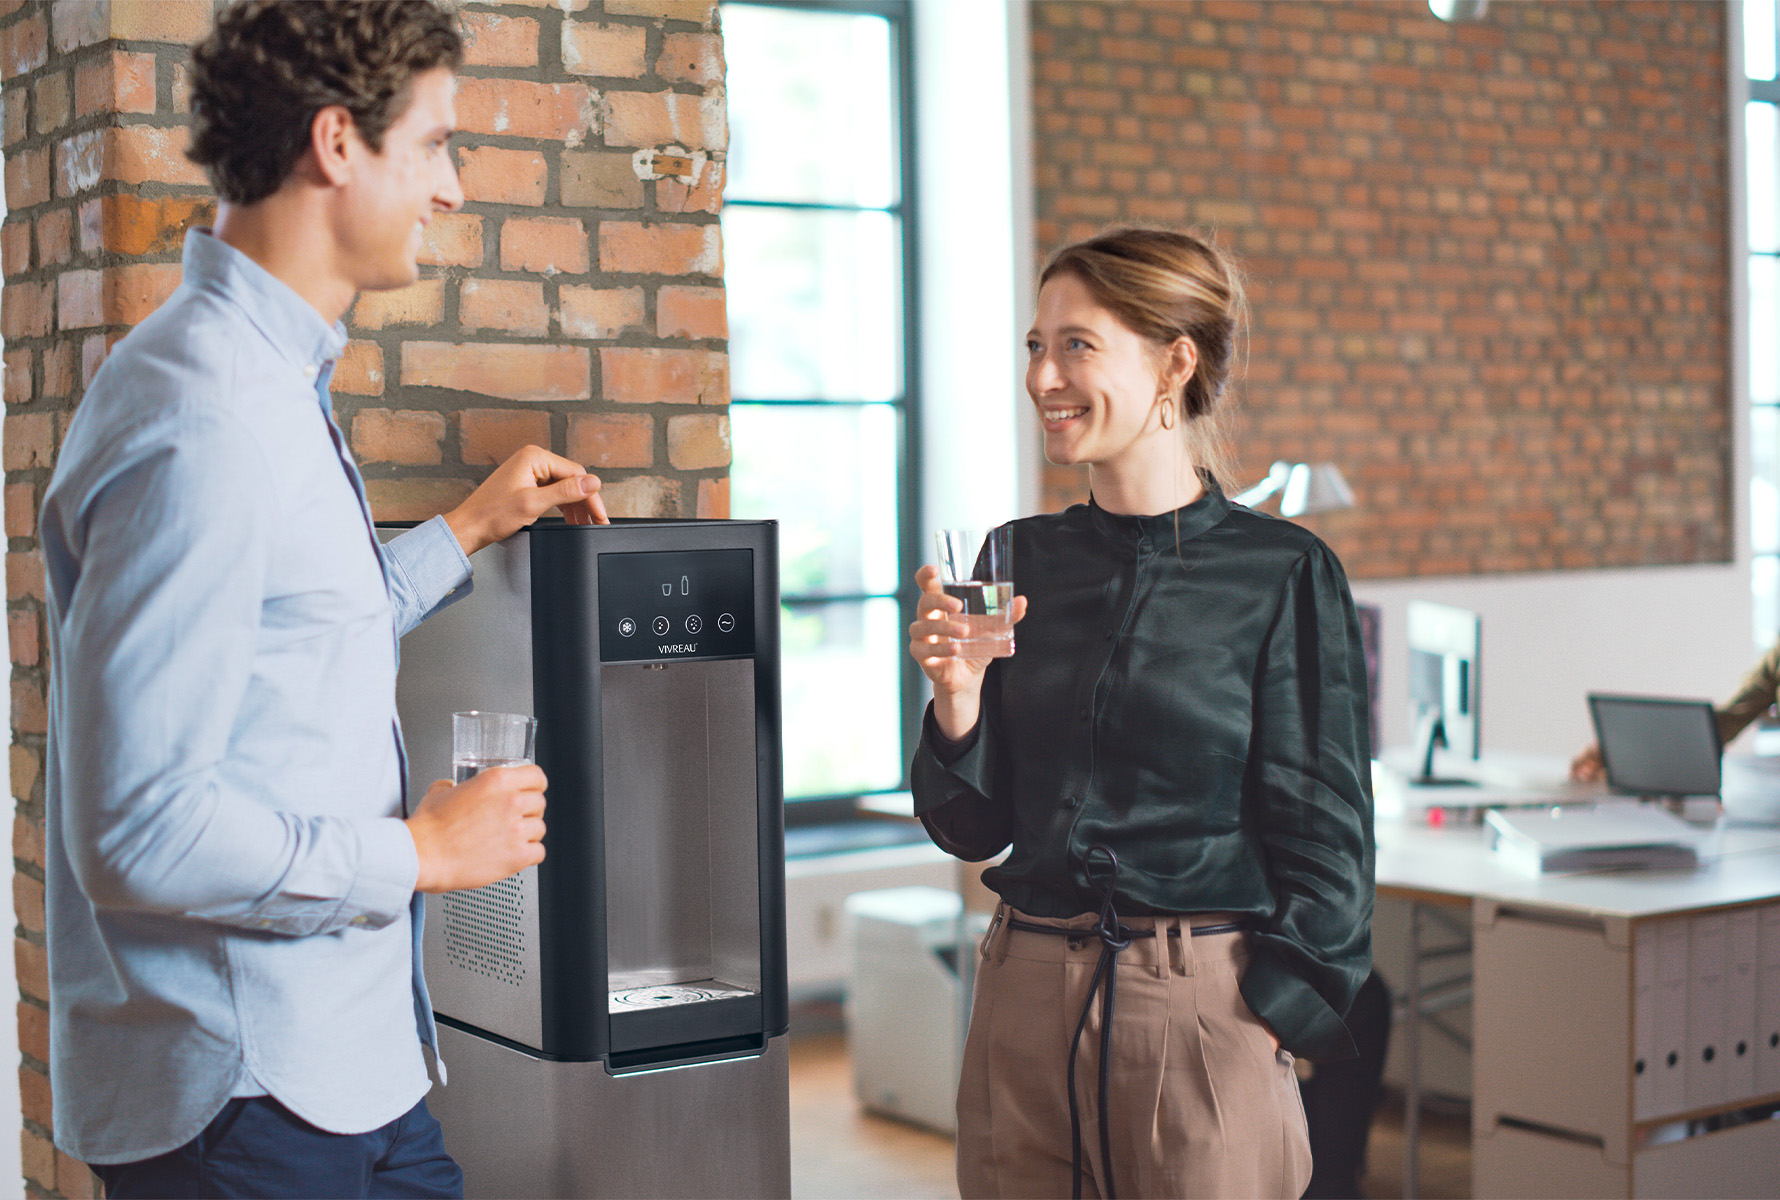 The Core Bottled Water Cooler